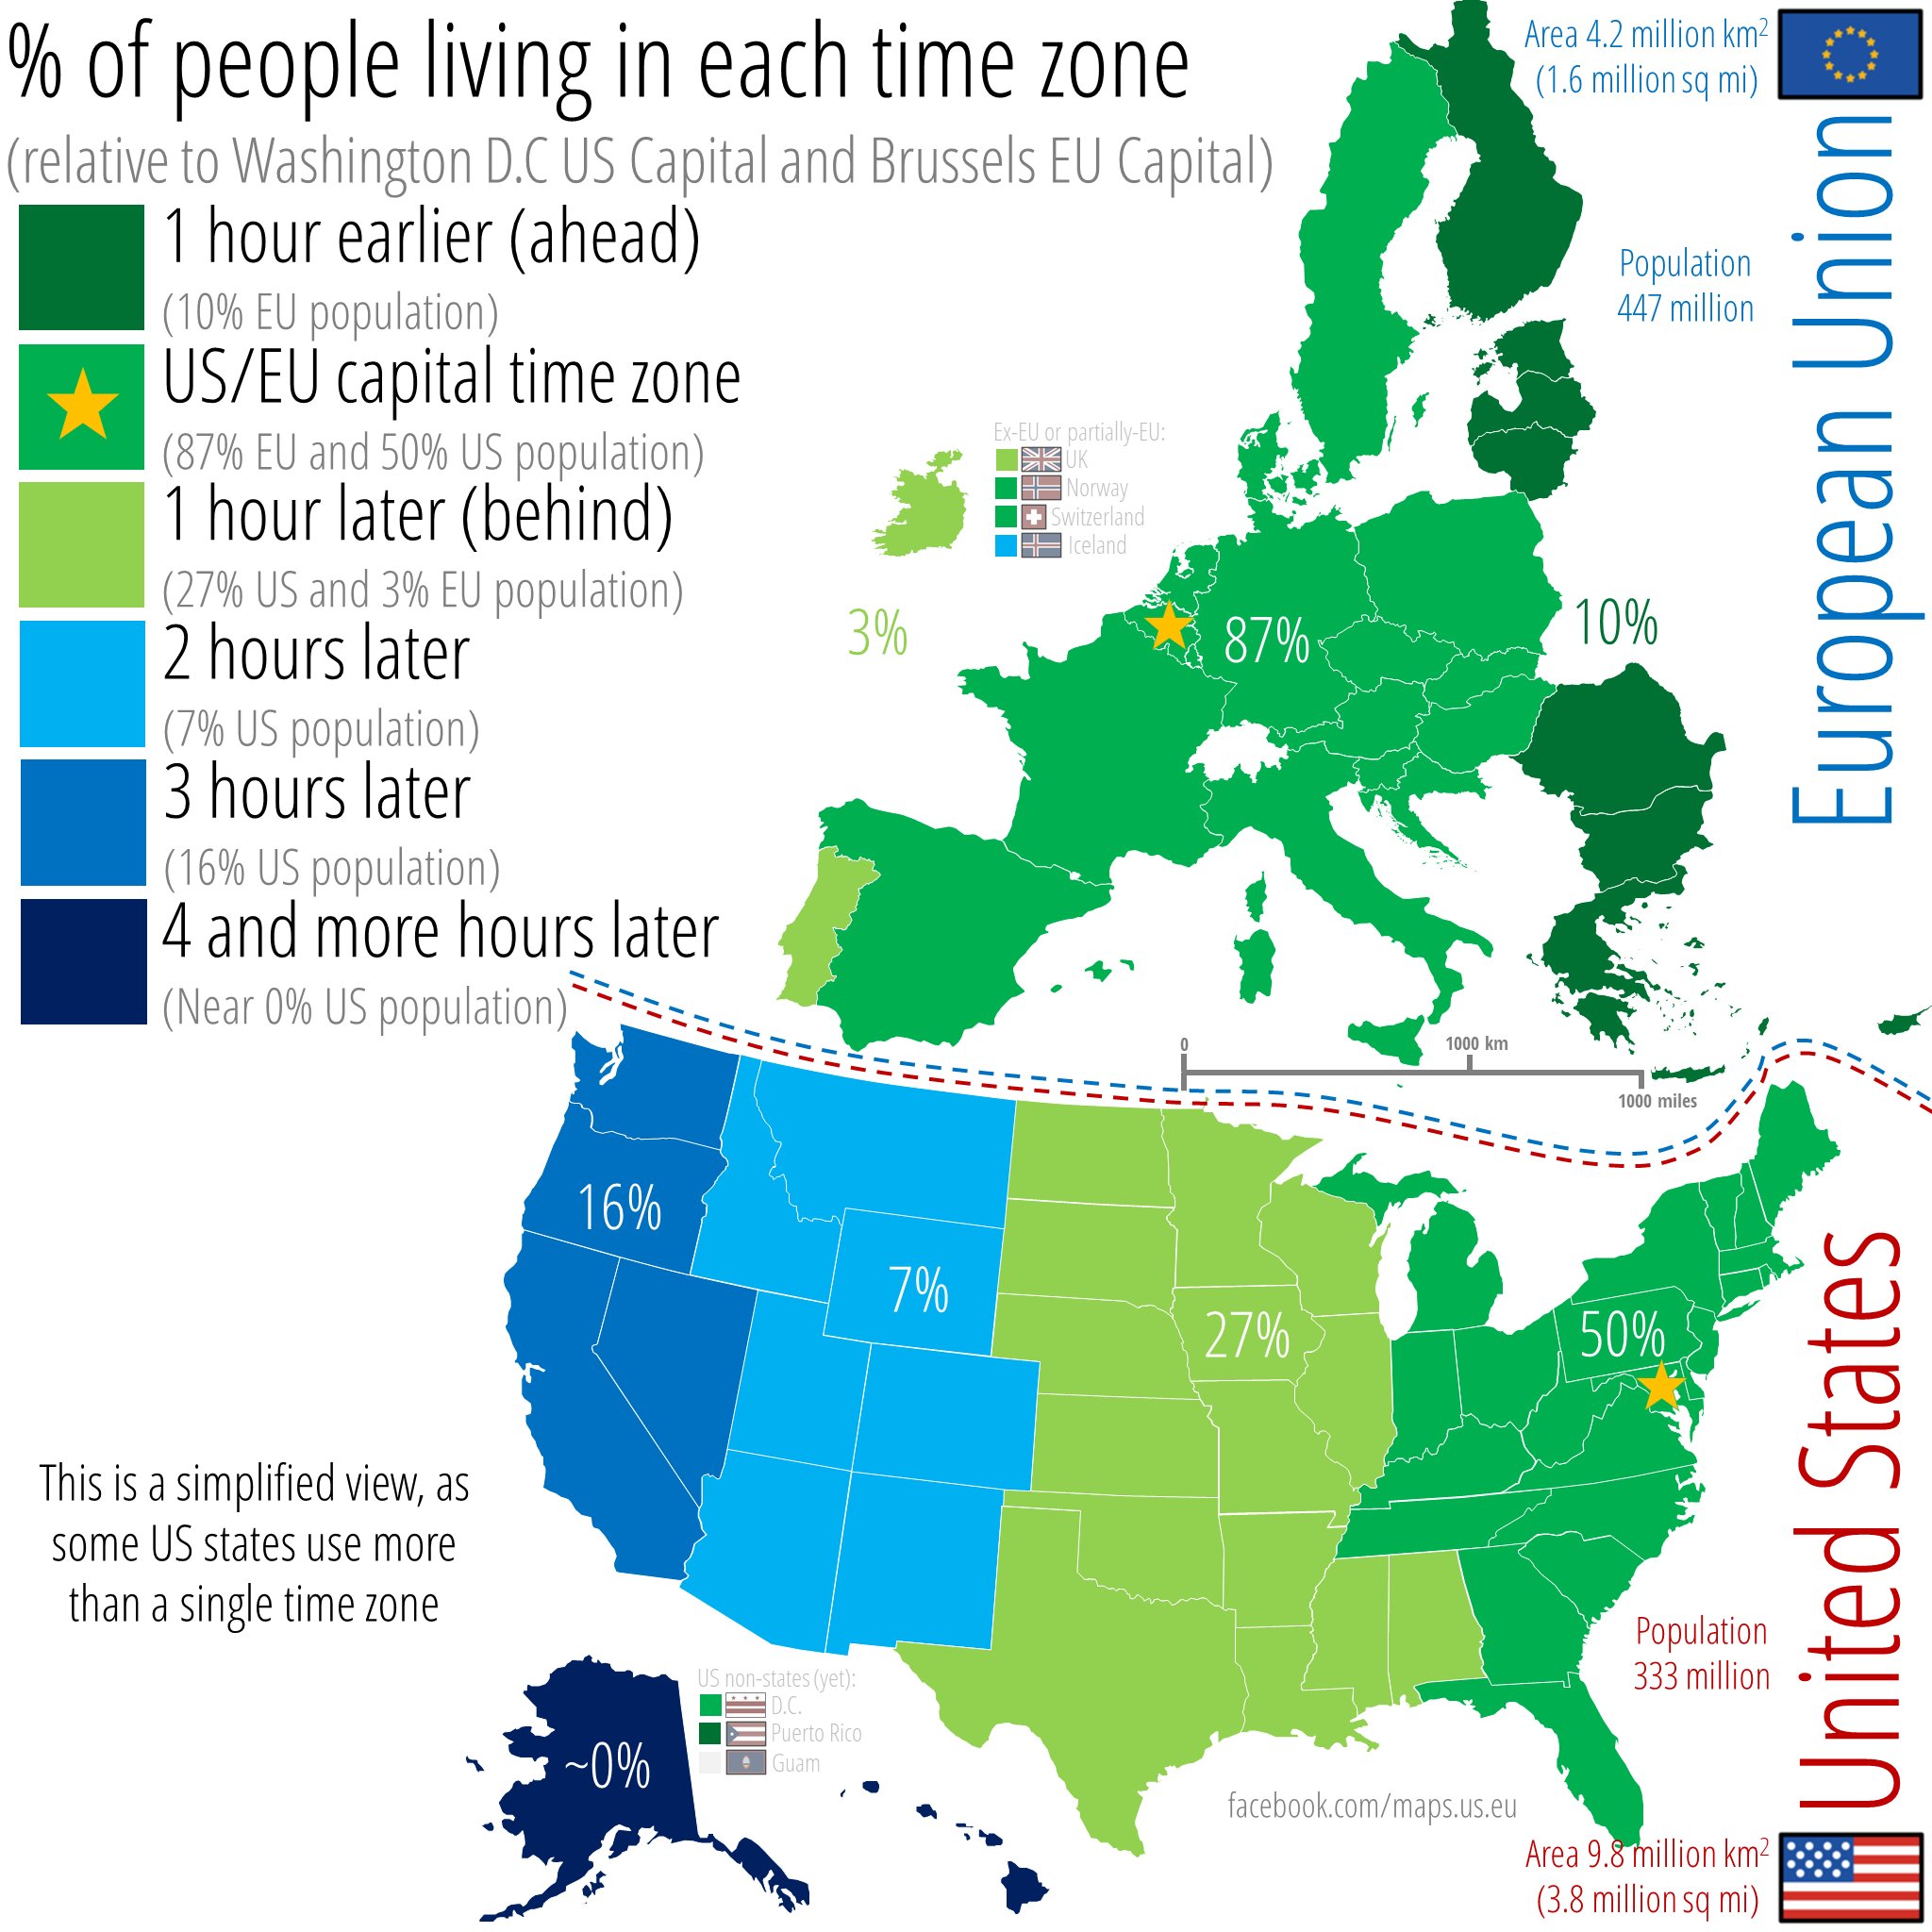 Maps US-EU on Twitter: "Percent of people in each time zone relative to the Capital. Washington D.C used as the US Capital and used as the EU Capital. This is